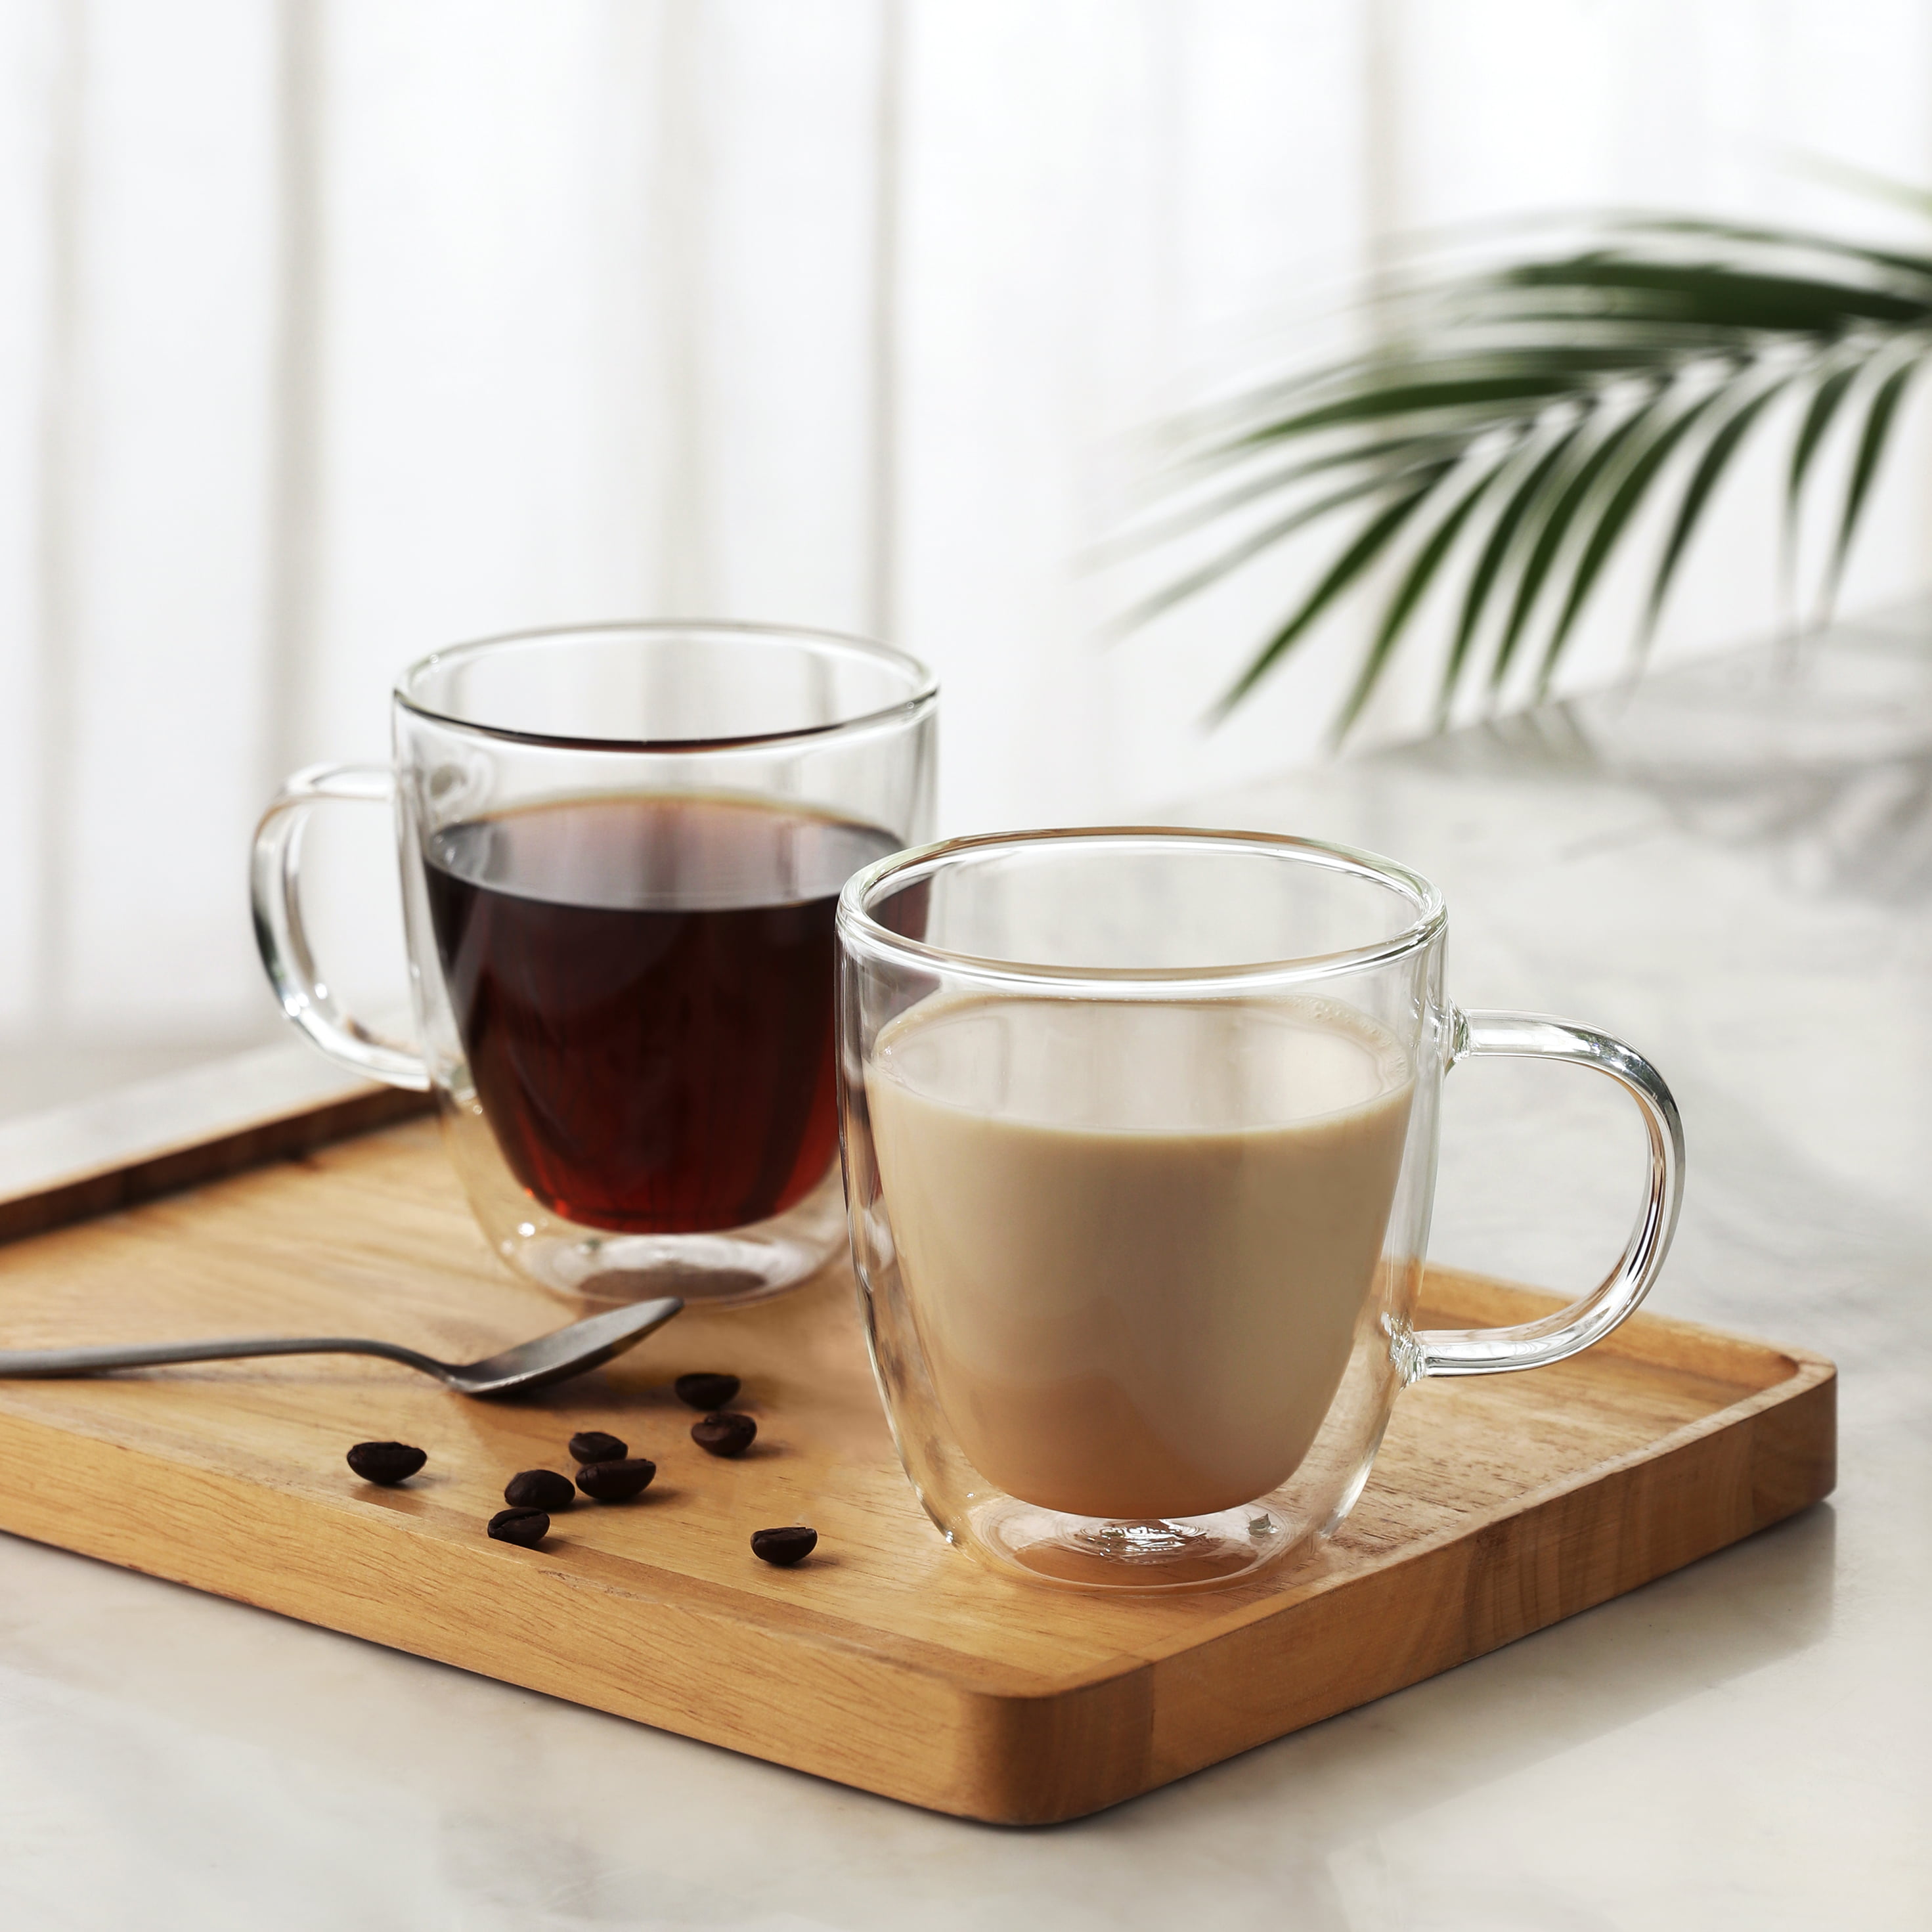 Topboutique Double Wall Glass Tumbler,2pcs/set Coffee Mugs with